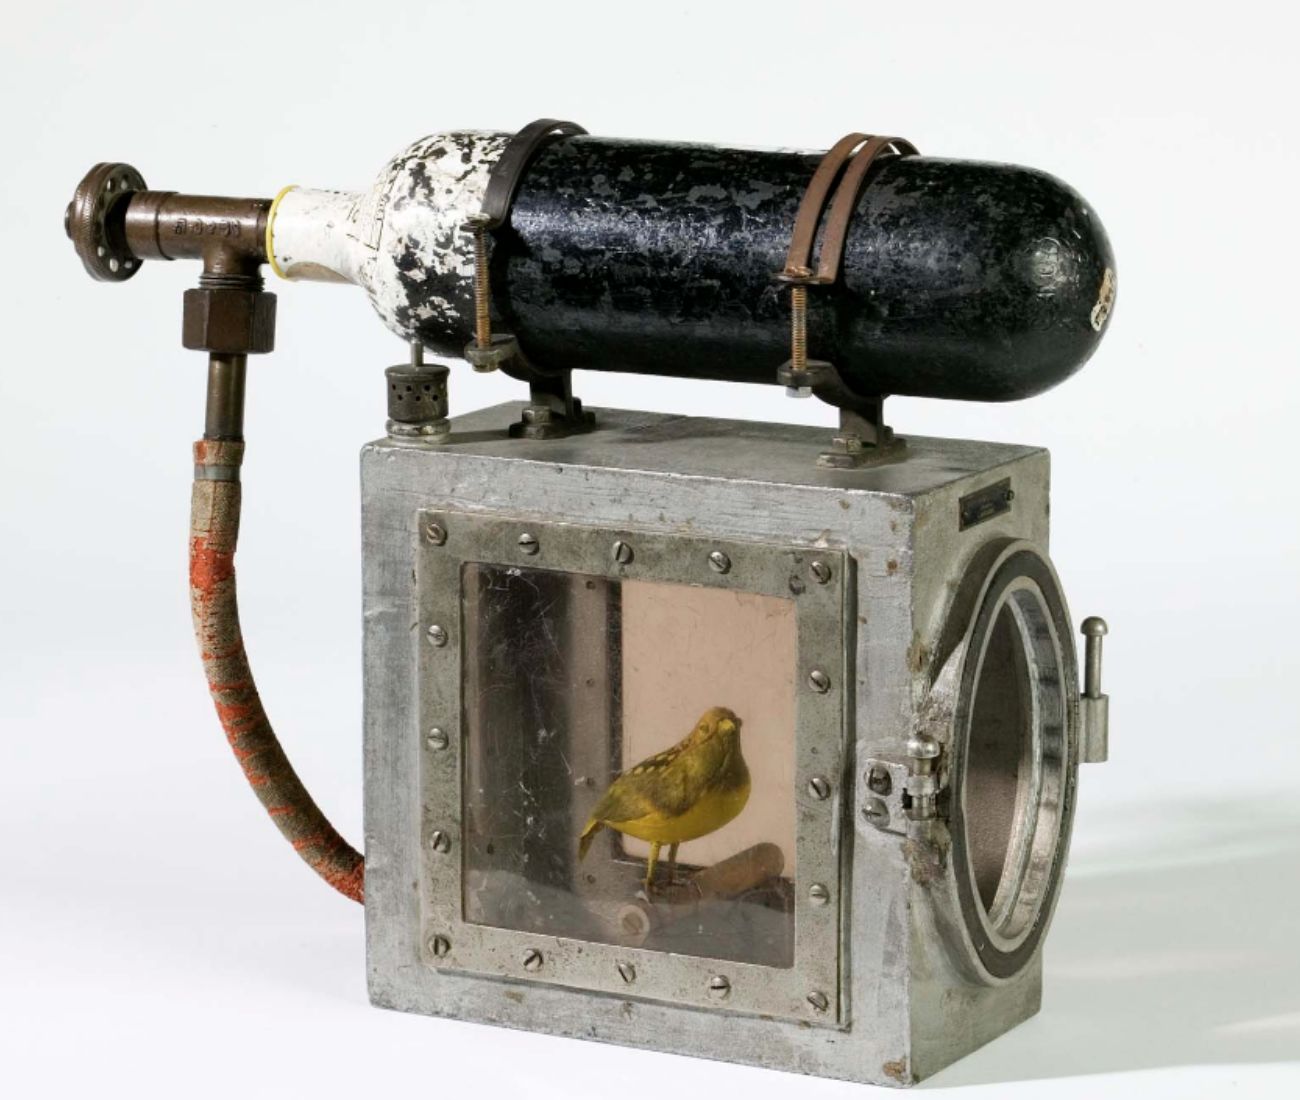  The device that revived canaries in coal mines warned of the peril 3